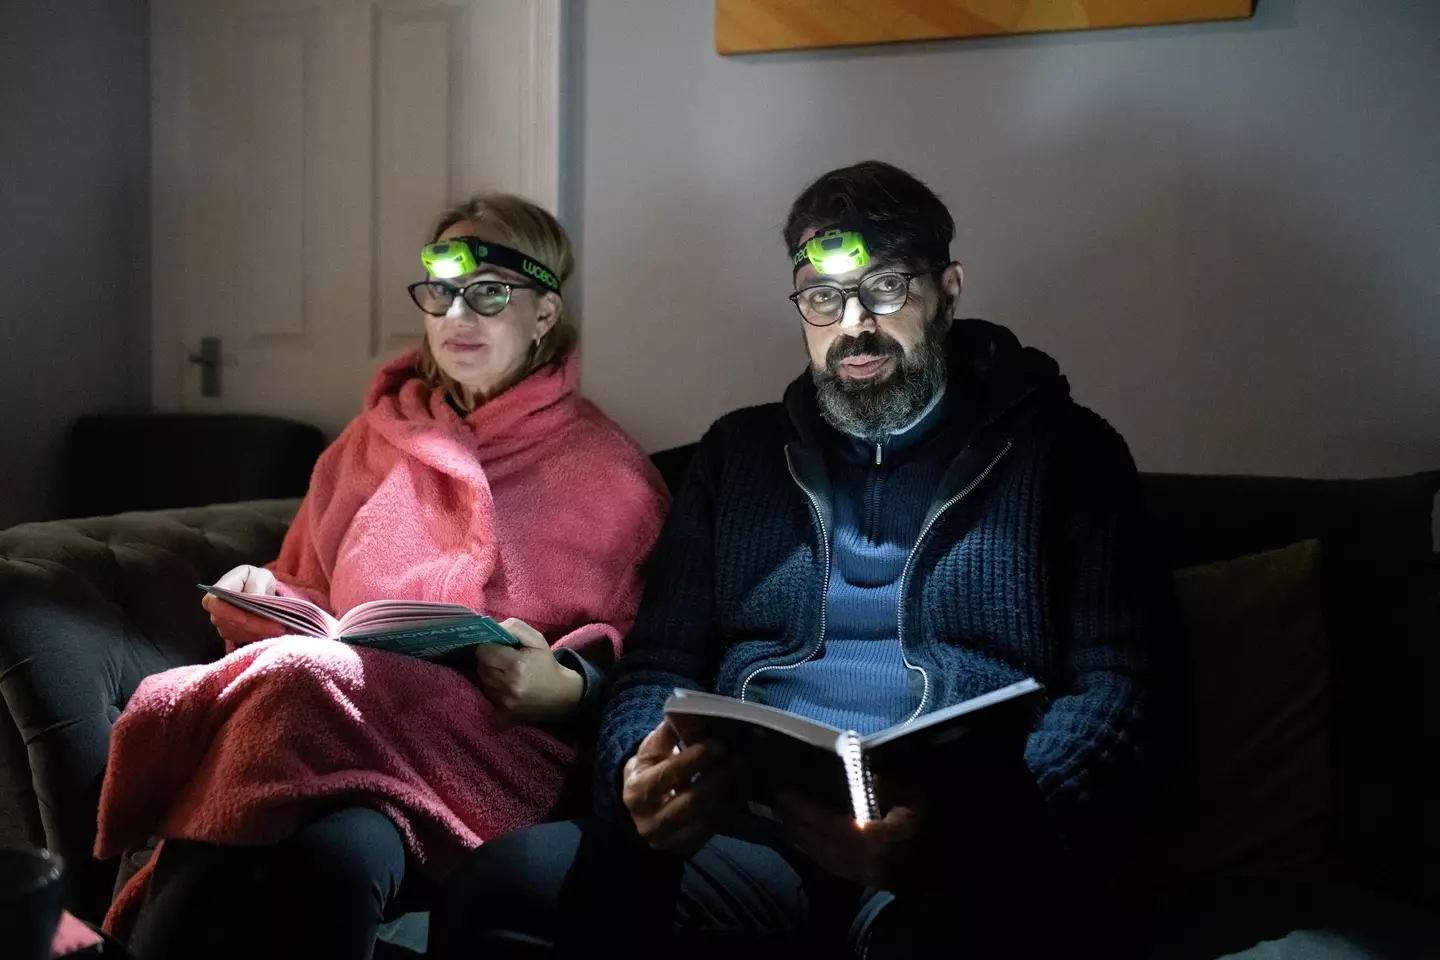 The family use headlamps to see in the dark.